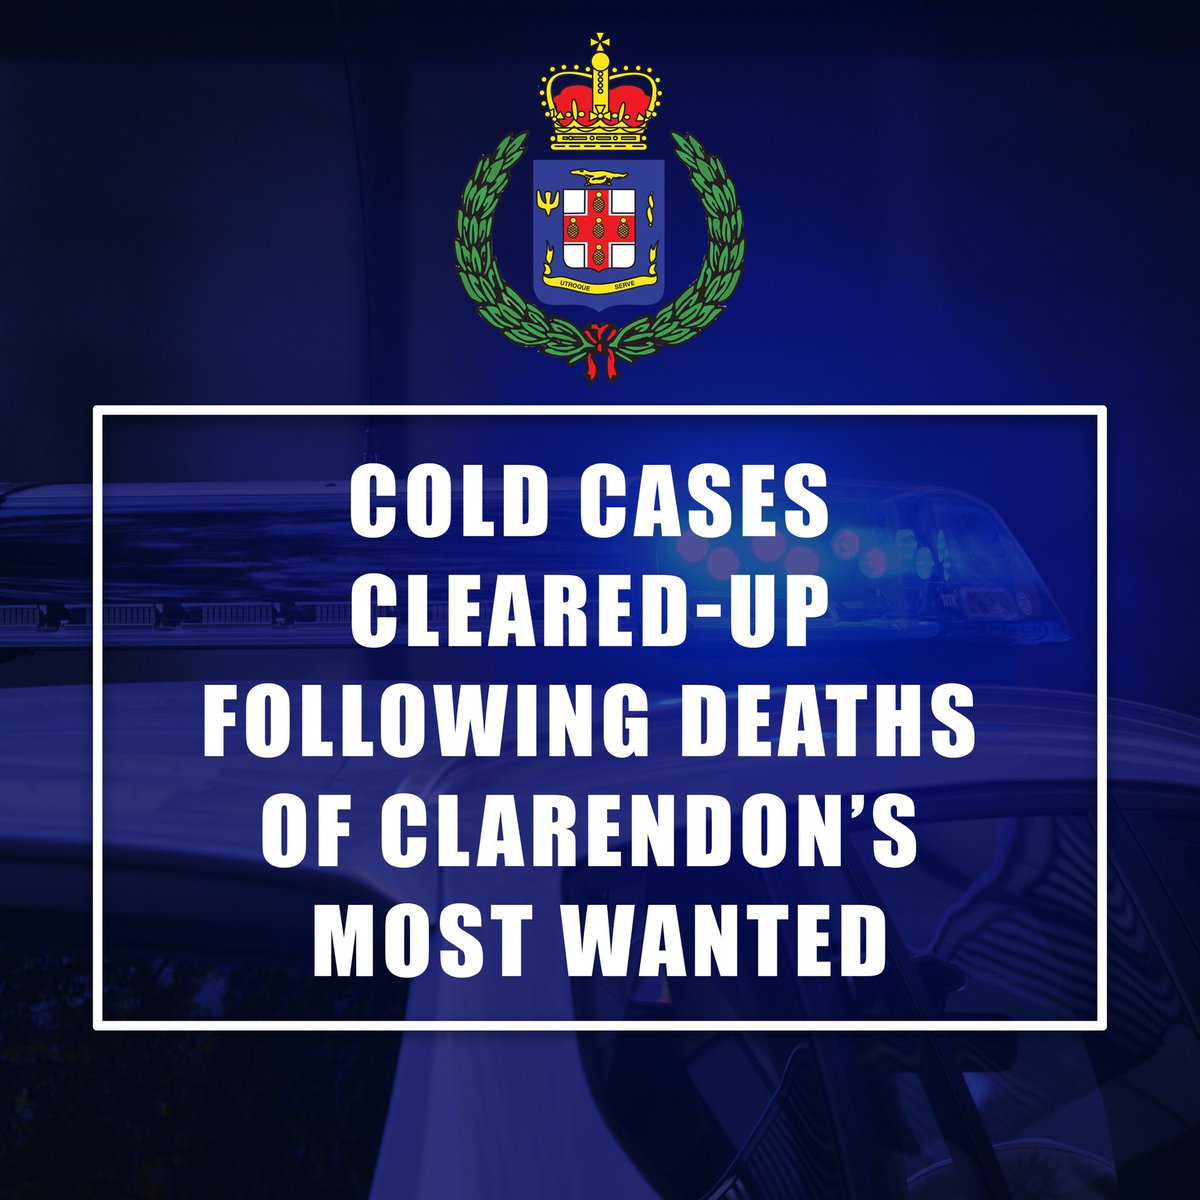 A cloak of silence has been lifted, following the deaths of 6 of Clarendon’s most notorious criminals.